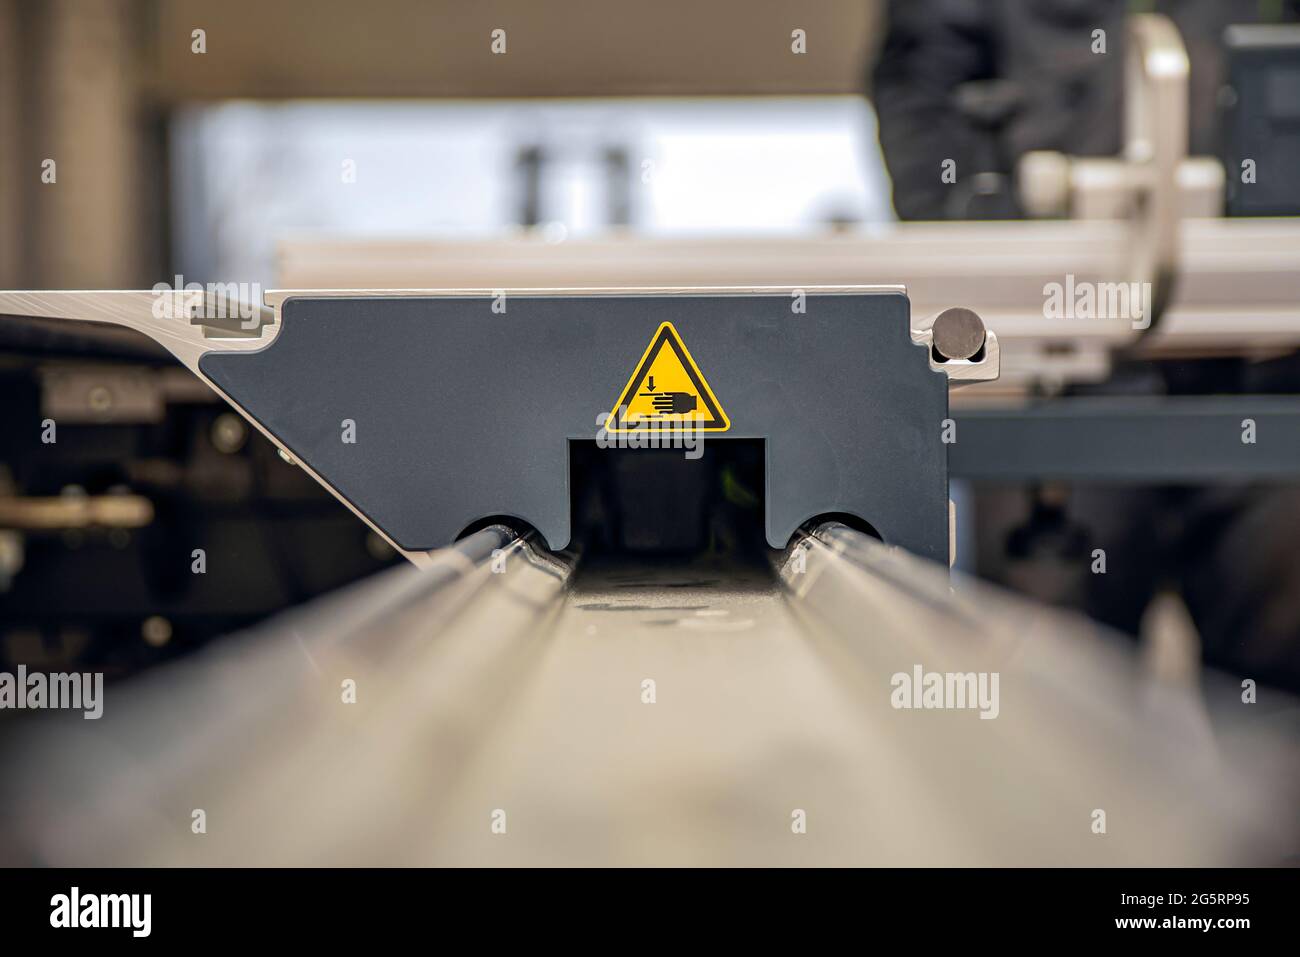 A warning sign on a woodworking machine. Production safety in a carpentry workshop. Hazard sign of moving parts in yellow triangle with hands Stock Photo